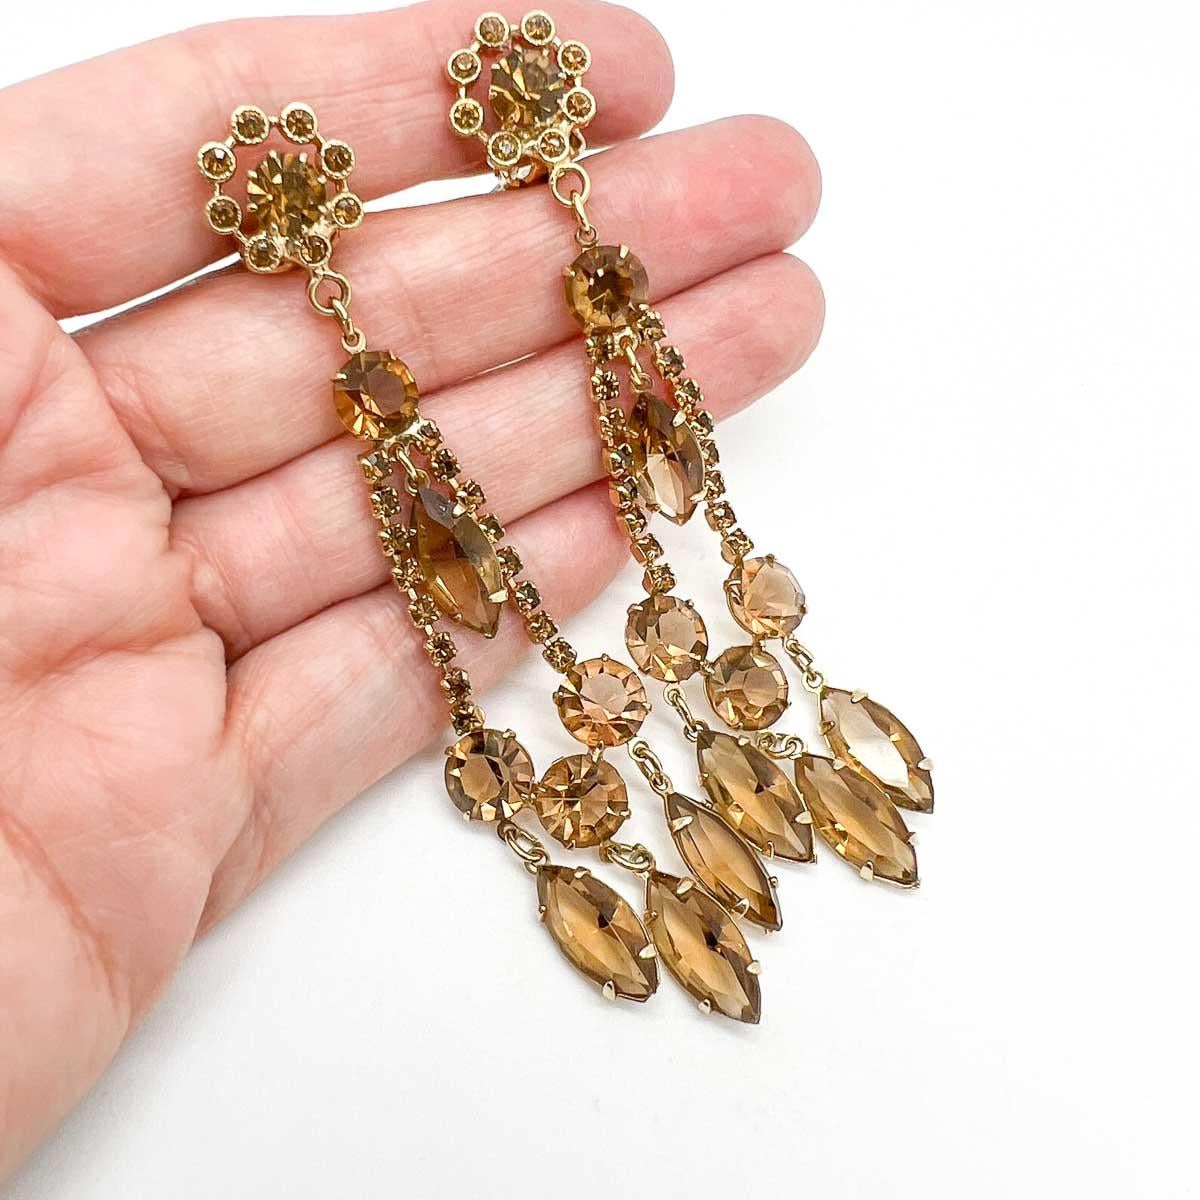 Vintage Topaz Crystal Earrings. The perfect feminine finishing touch with a wow factor.

Vintage Condition: Very good without damage or noteworthy wear.
Materials: Gold plated metal, glass crystal
Fastening: Clip on
Approximate Dimensions: